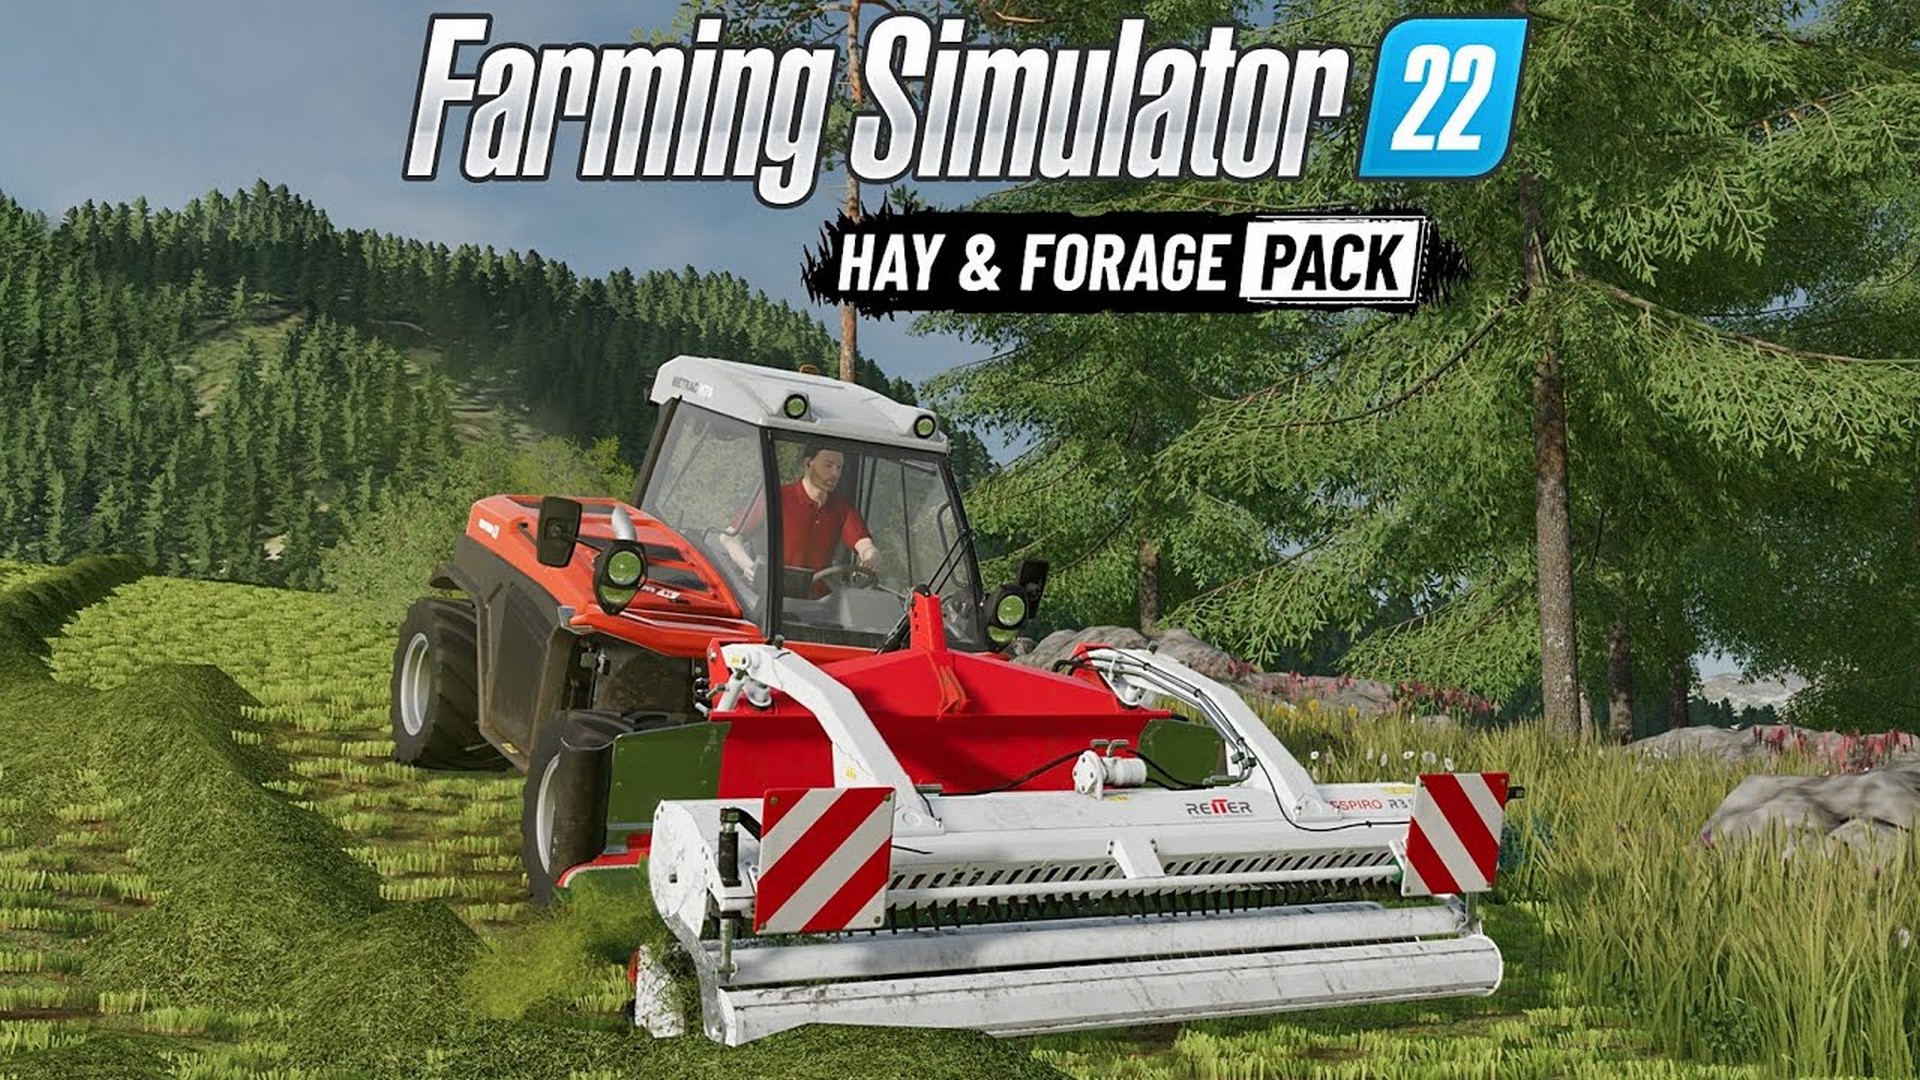 Farming Simulator 22: Hay & Forage Pack Adds New Brands & Machines For Greenland Operations